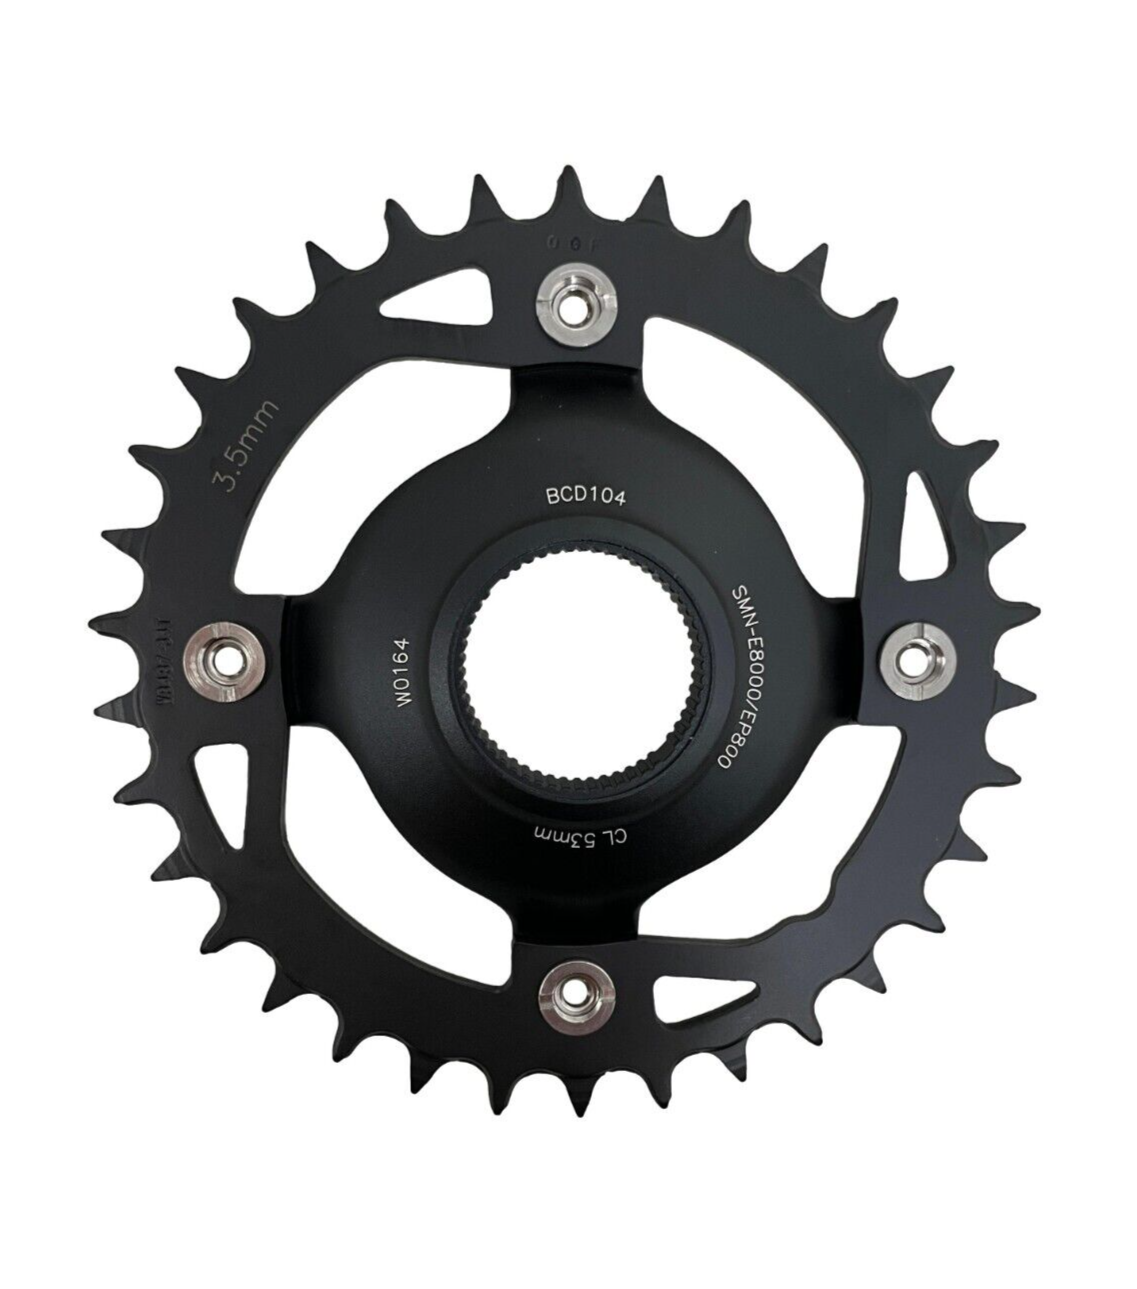 FSA Megatooth 34T Chainring With Shimano E8000 / EP800 Spide - 104mm BCD - Black - Sportandleisure.com